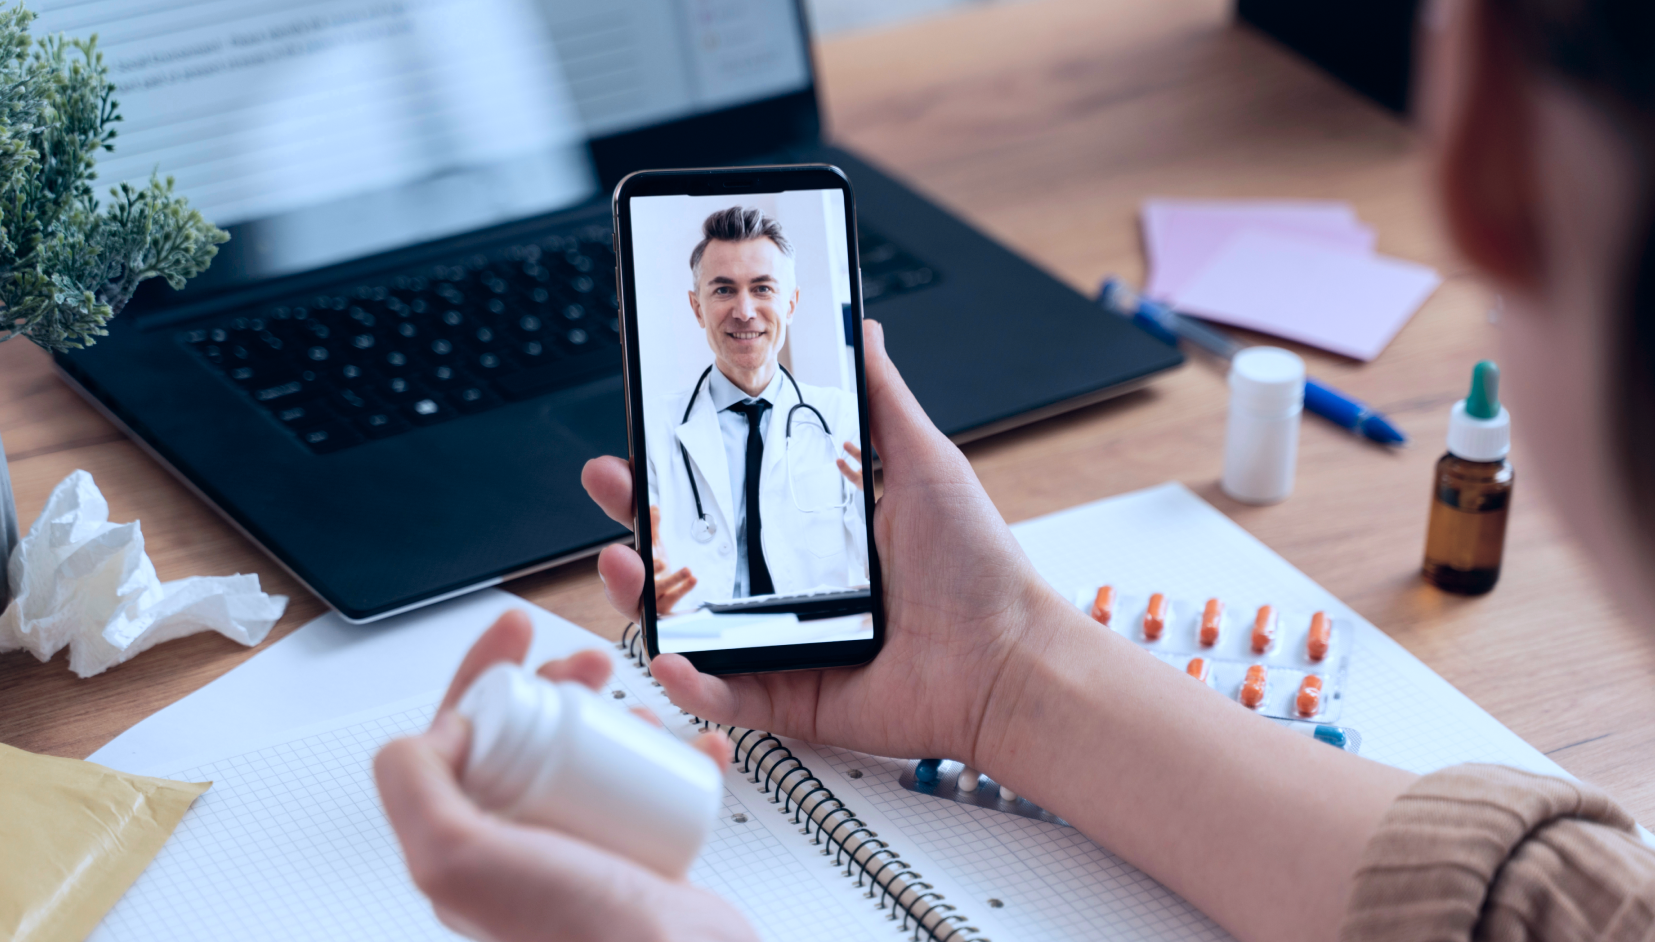 Implementing Patient-Centered Telemedicine: Key Tenets